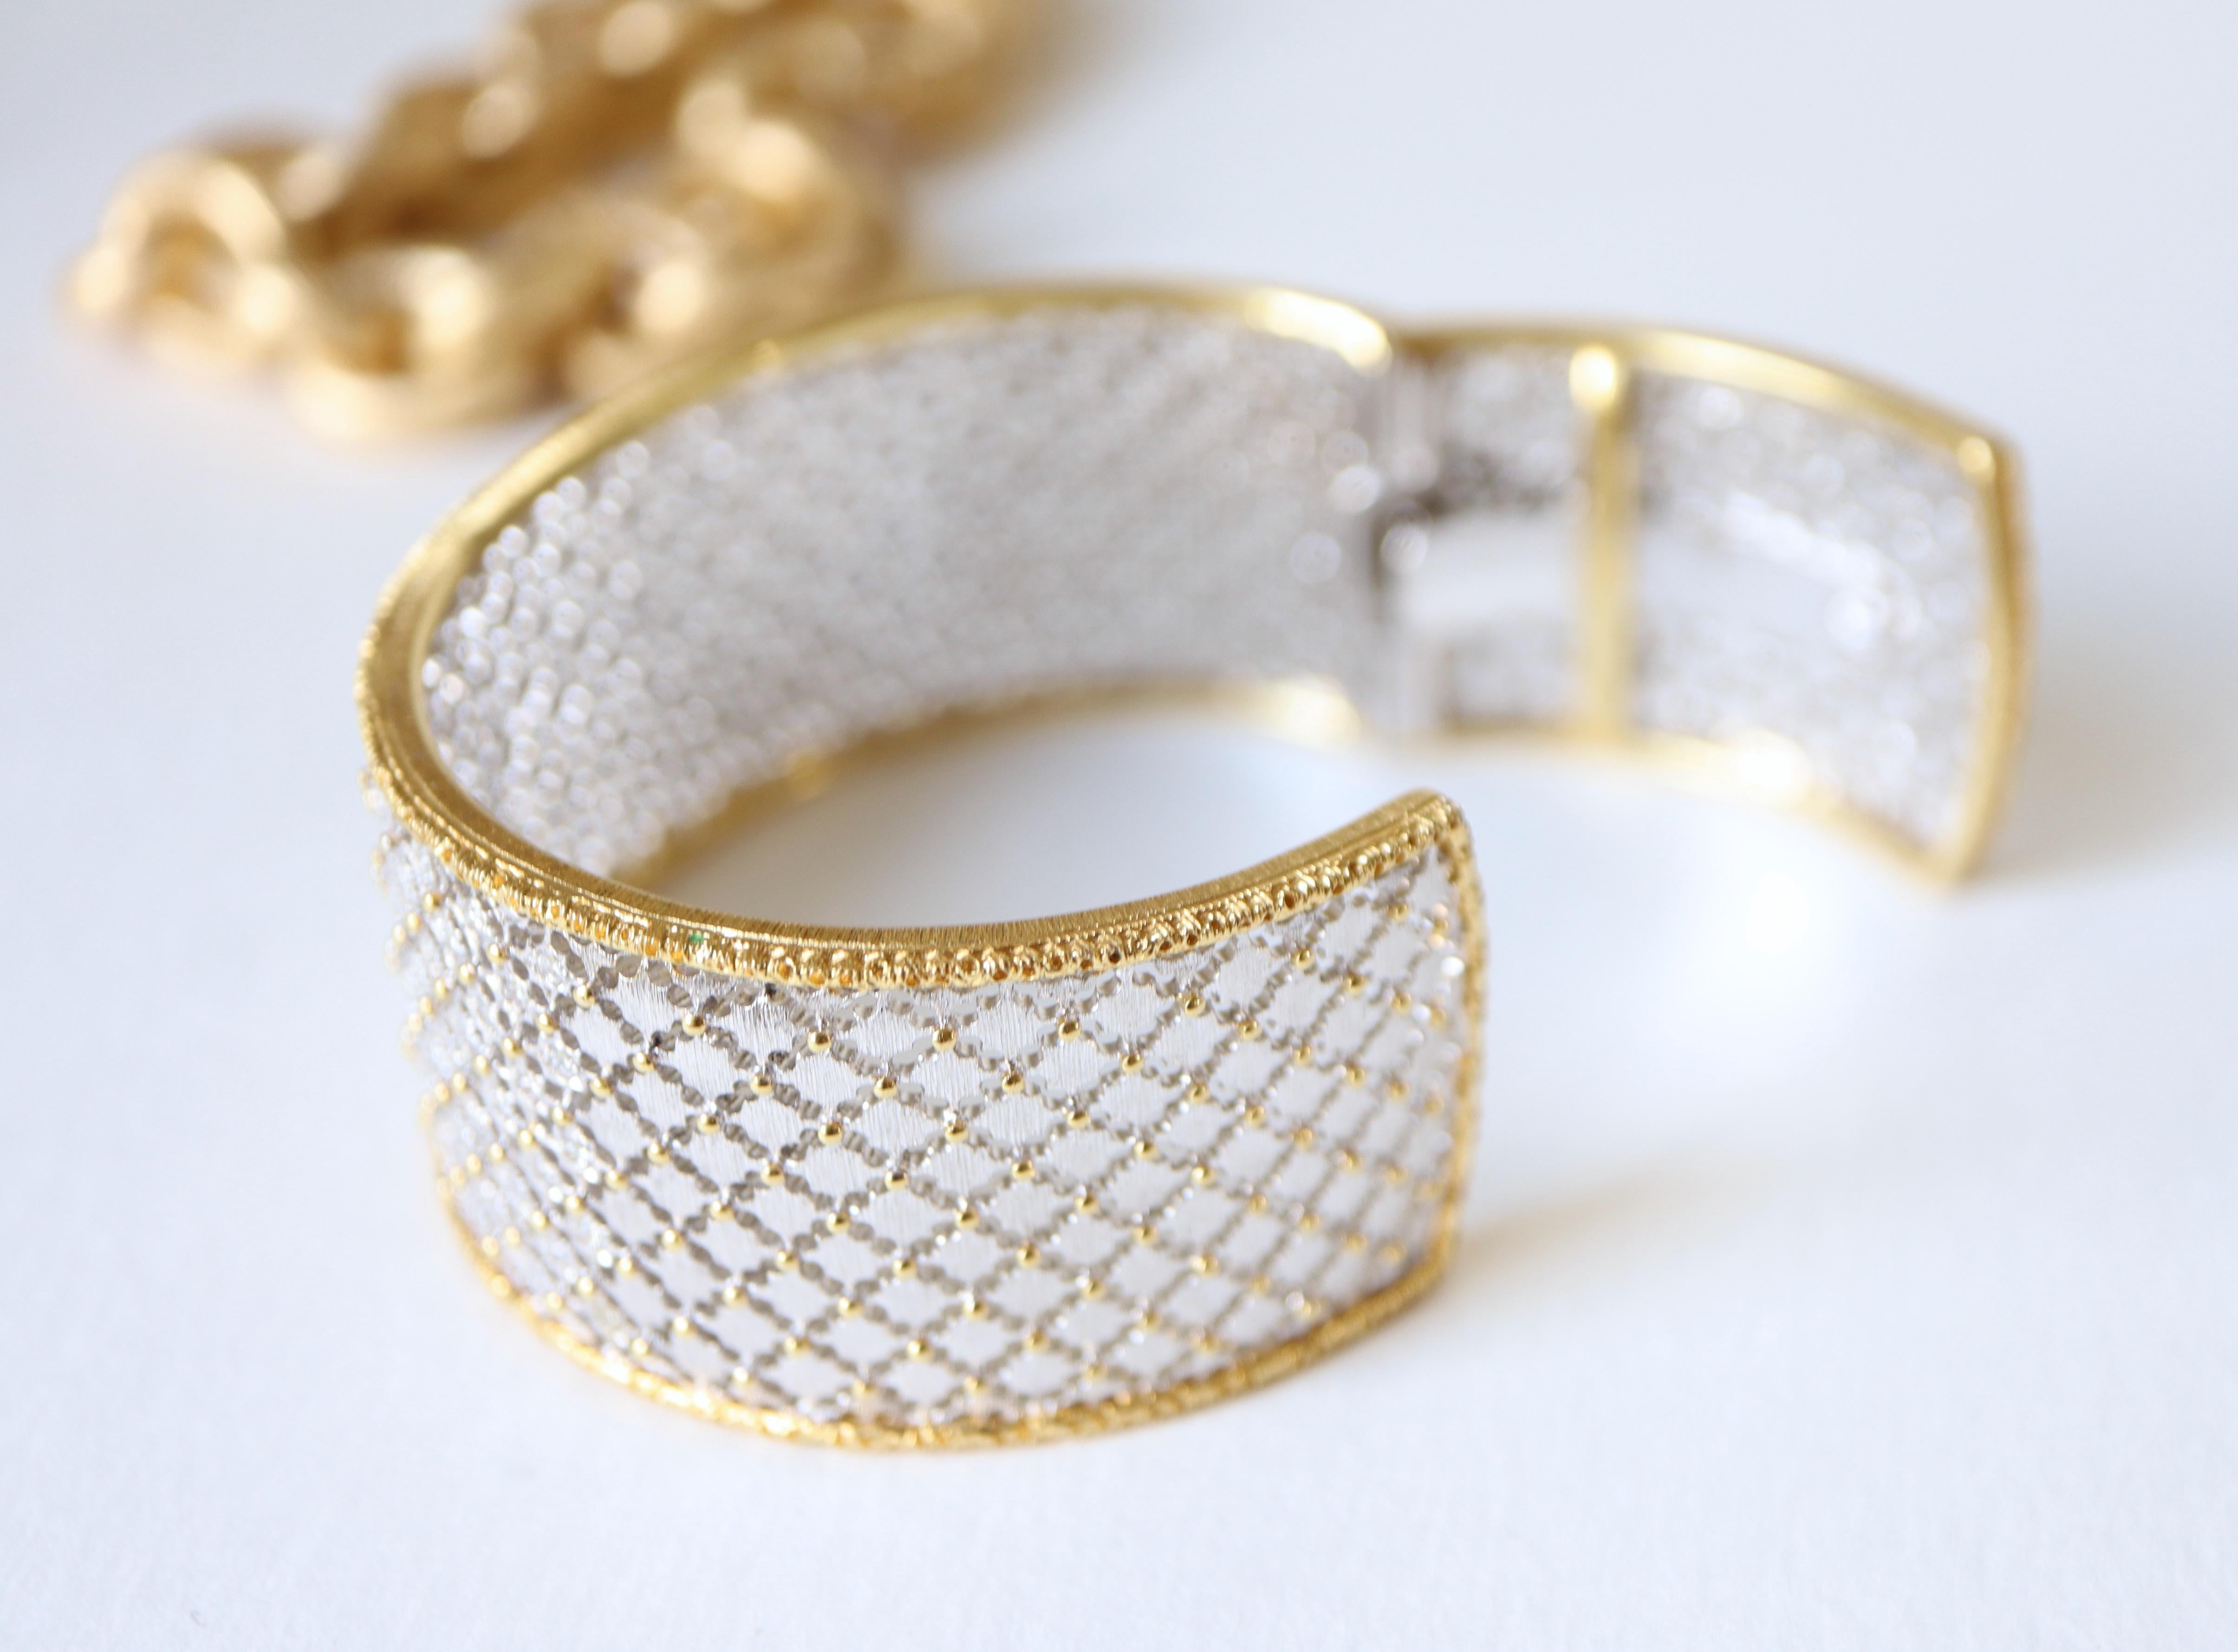 Bracelet Bangle Yellow Withe Gold 18k 3.51 Carats of Diamonds For Sale 3